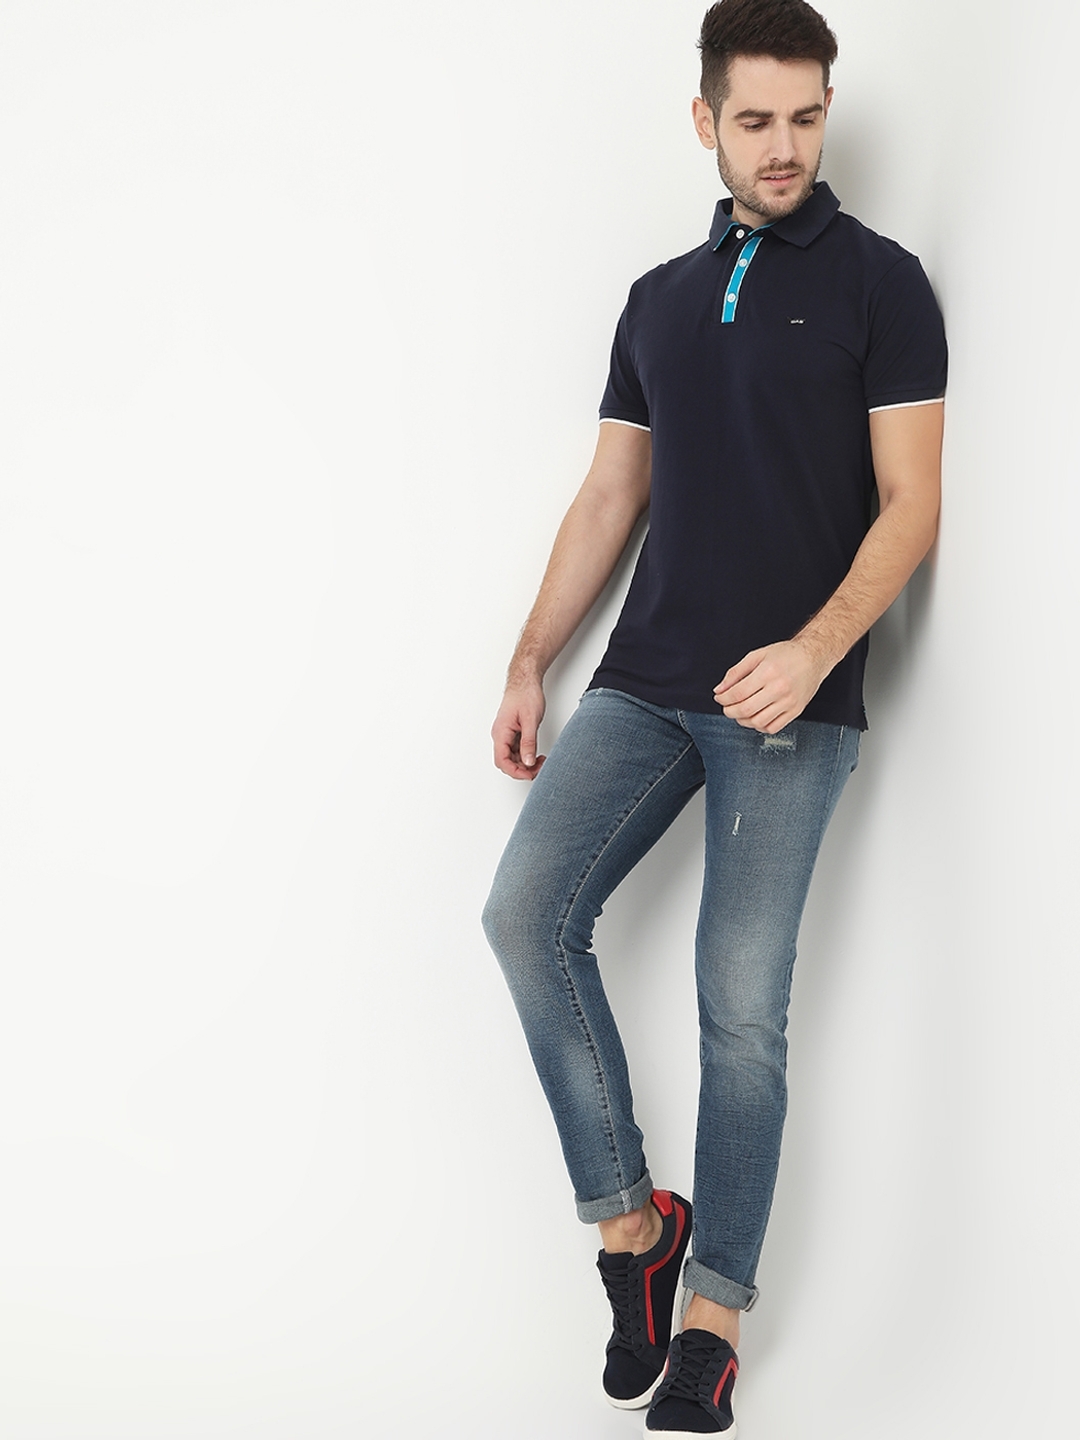 AGAP Slim Fit Polo T-shirt with Contrast Placket